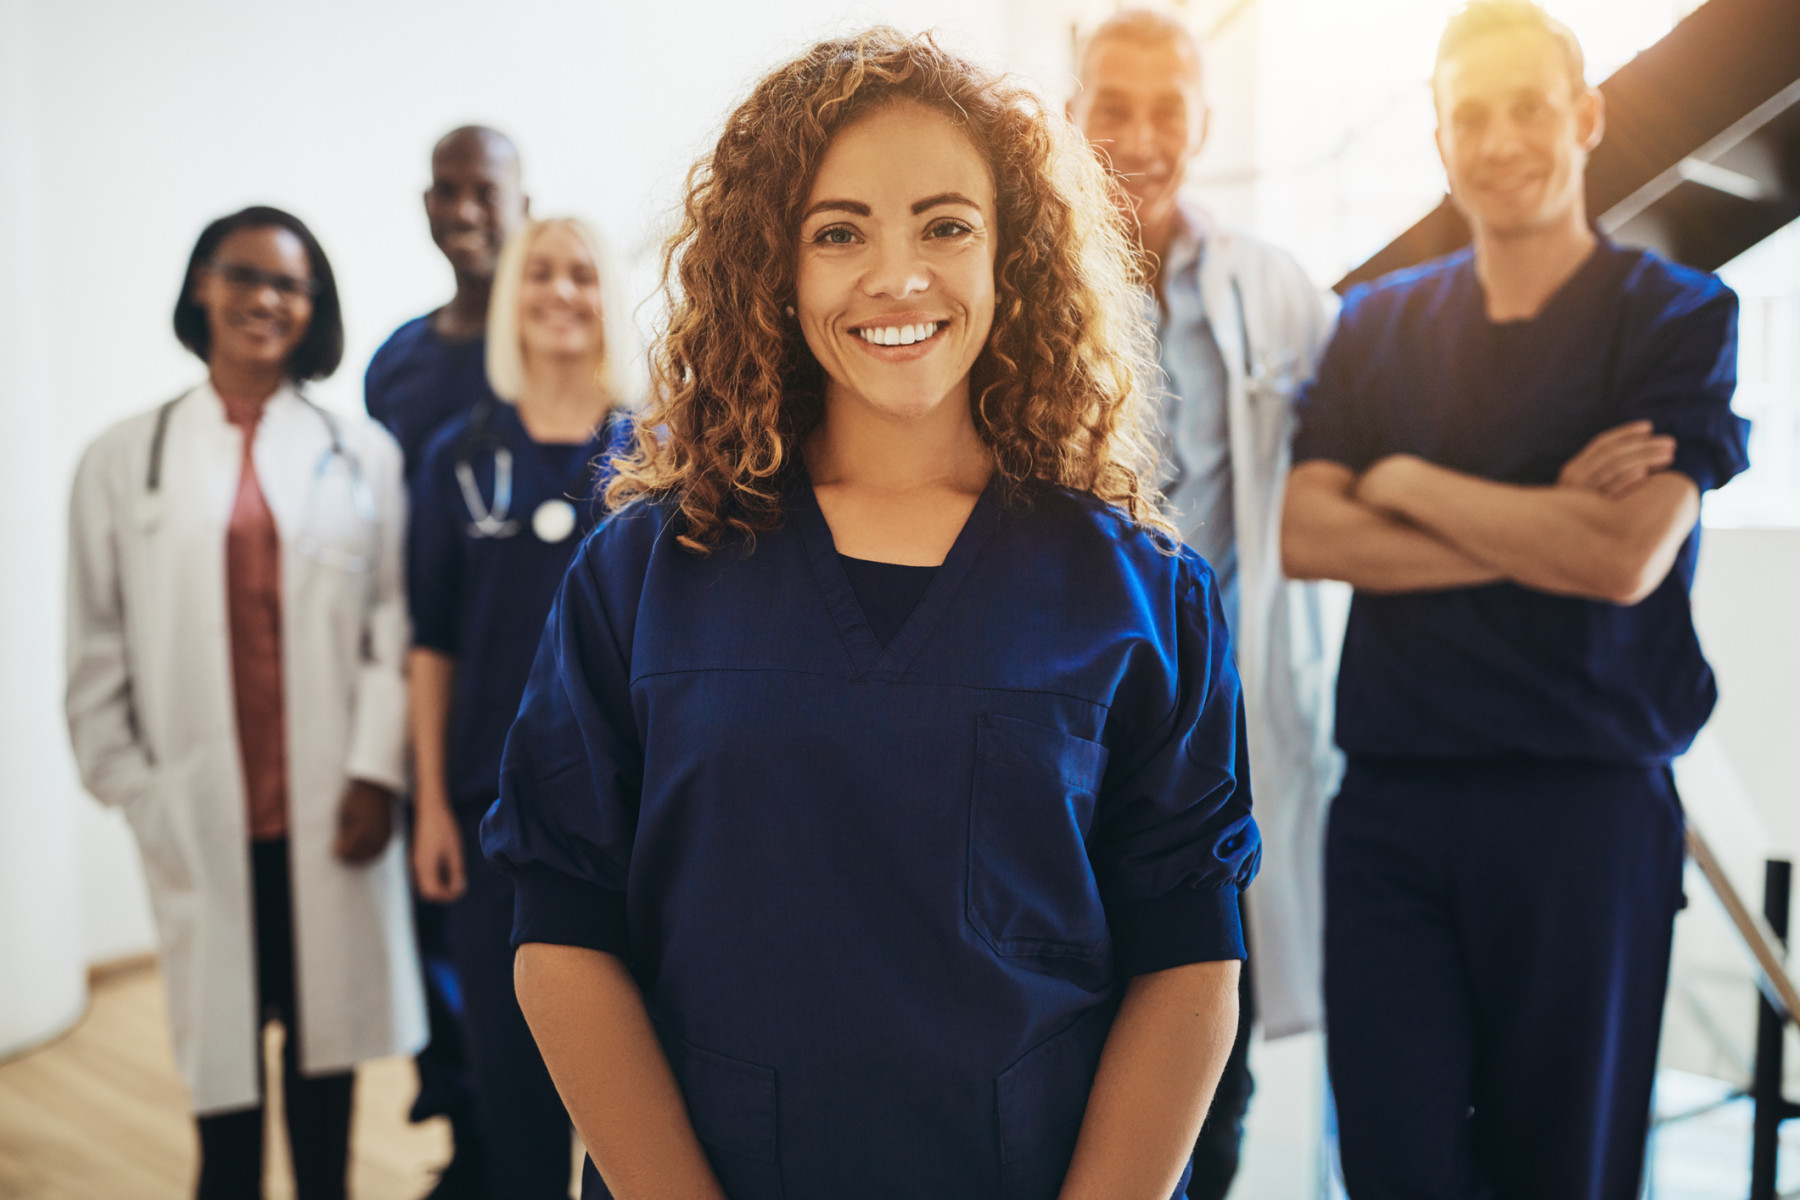 A confident allied health professional stands at the forefront, with a diverse team of healthcare colleagues in the background, representing the broad spectrum of allied health care assistance available to support patient well-being.